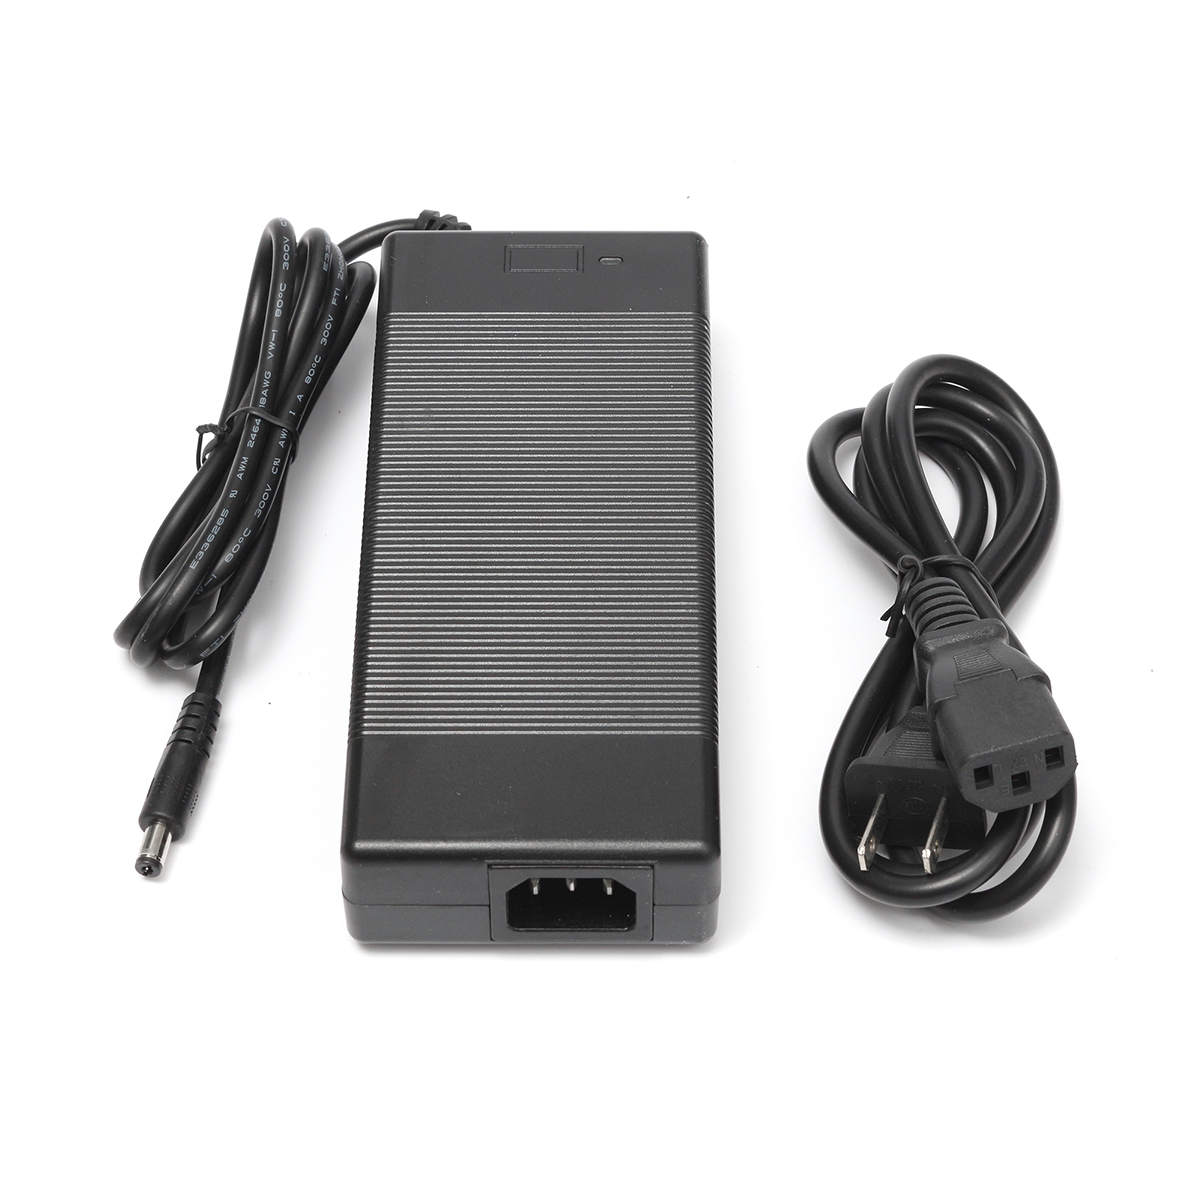 

50.4V 2A Power Adapter For Self-Balanced Vehicle12S Li-ion Battery Charger